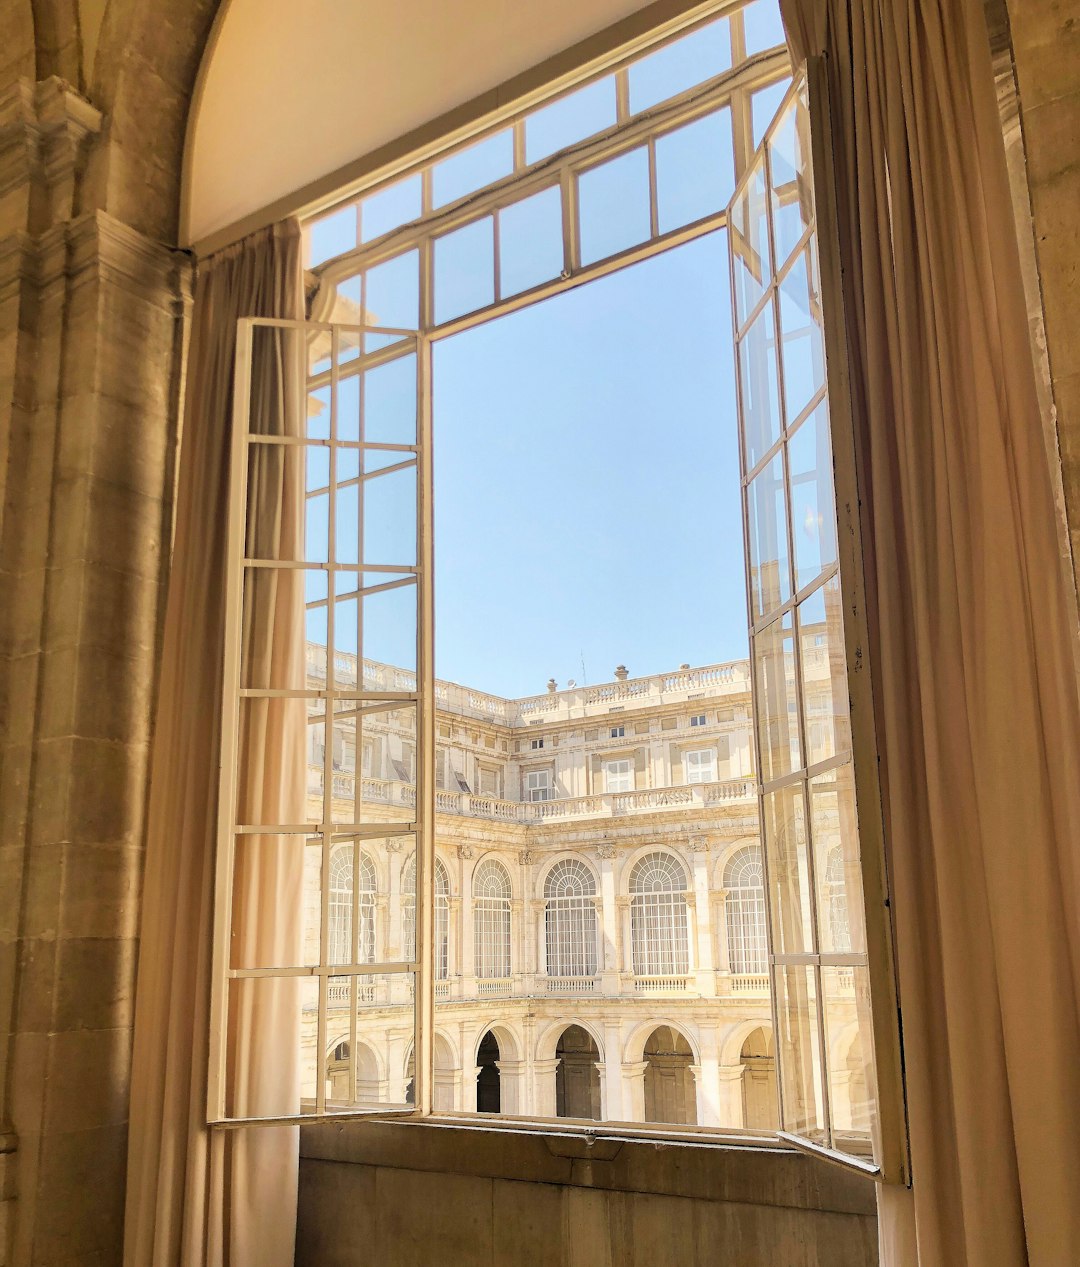 Travel Tips and Stories of Royal Palace of Madrid in Spain